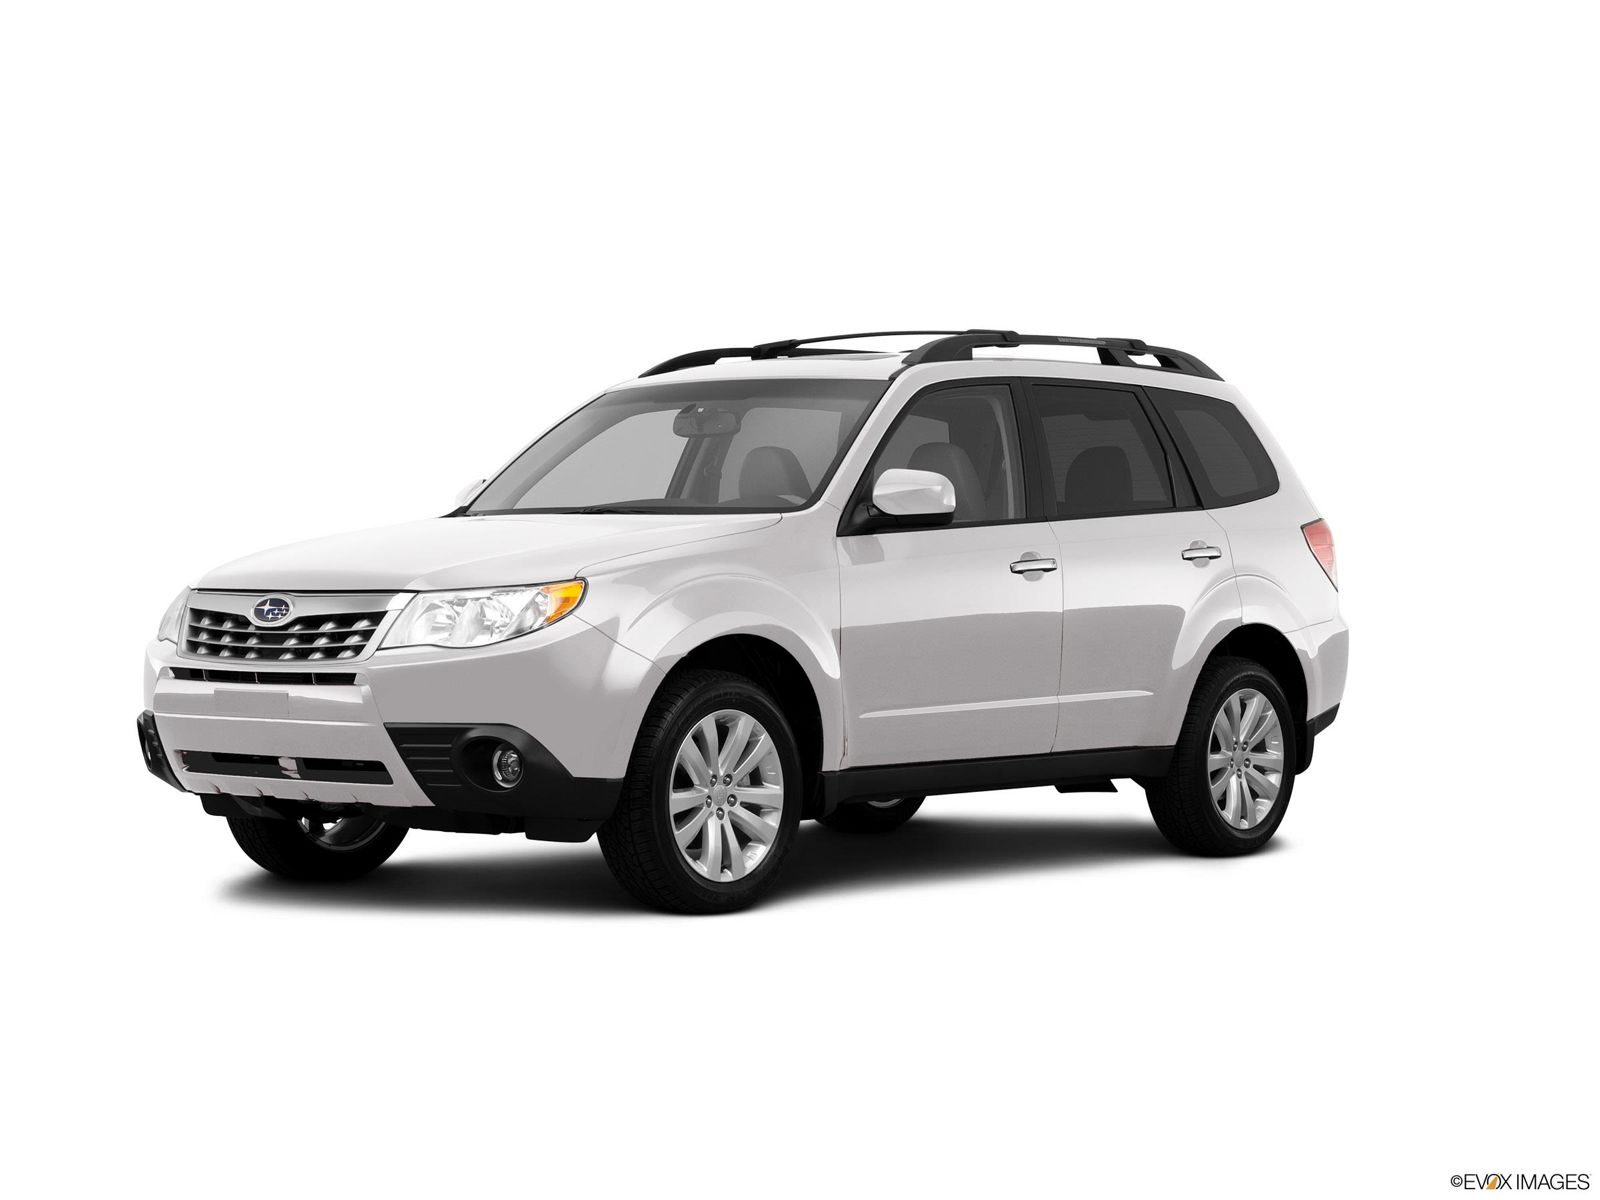 2013 Subaru Forester Research, Photos, Specs and Expertise | CarMax